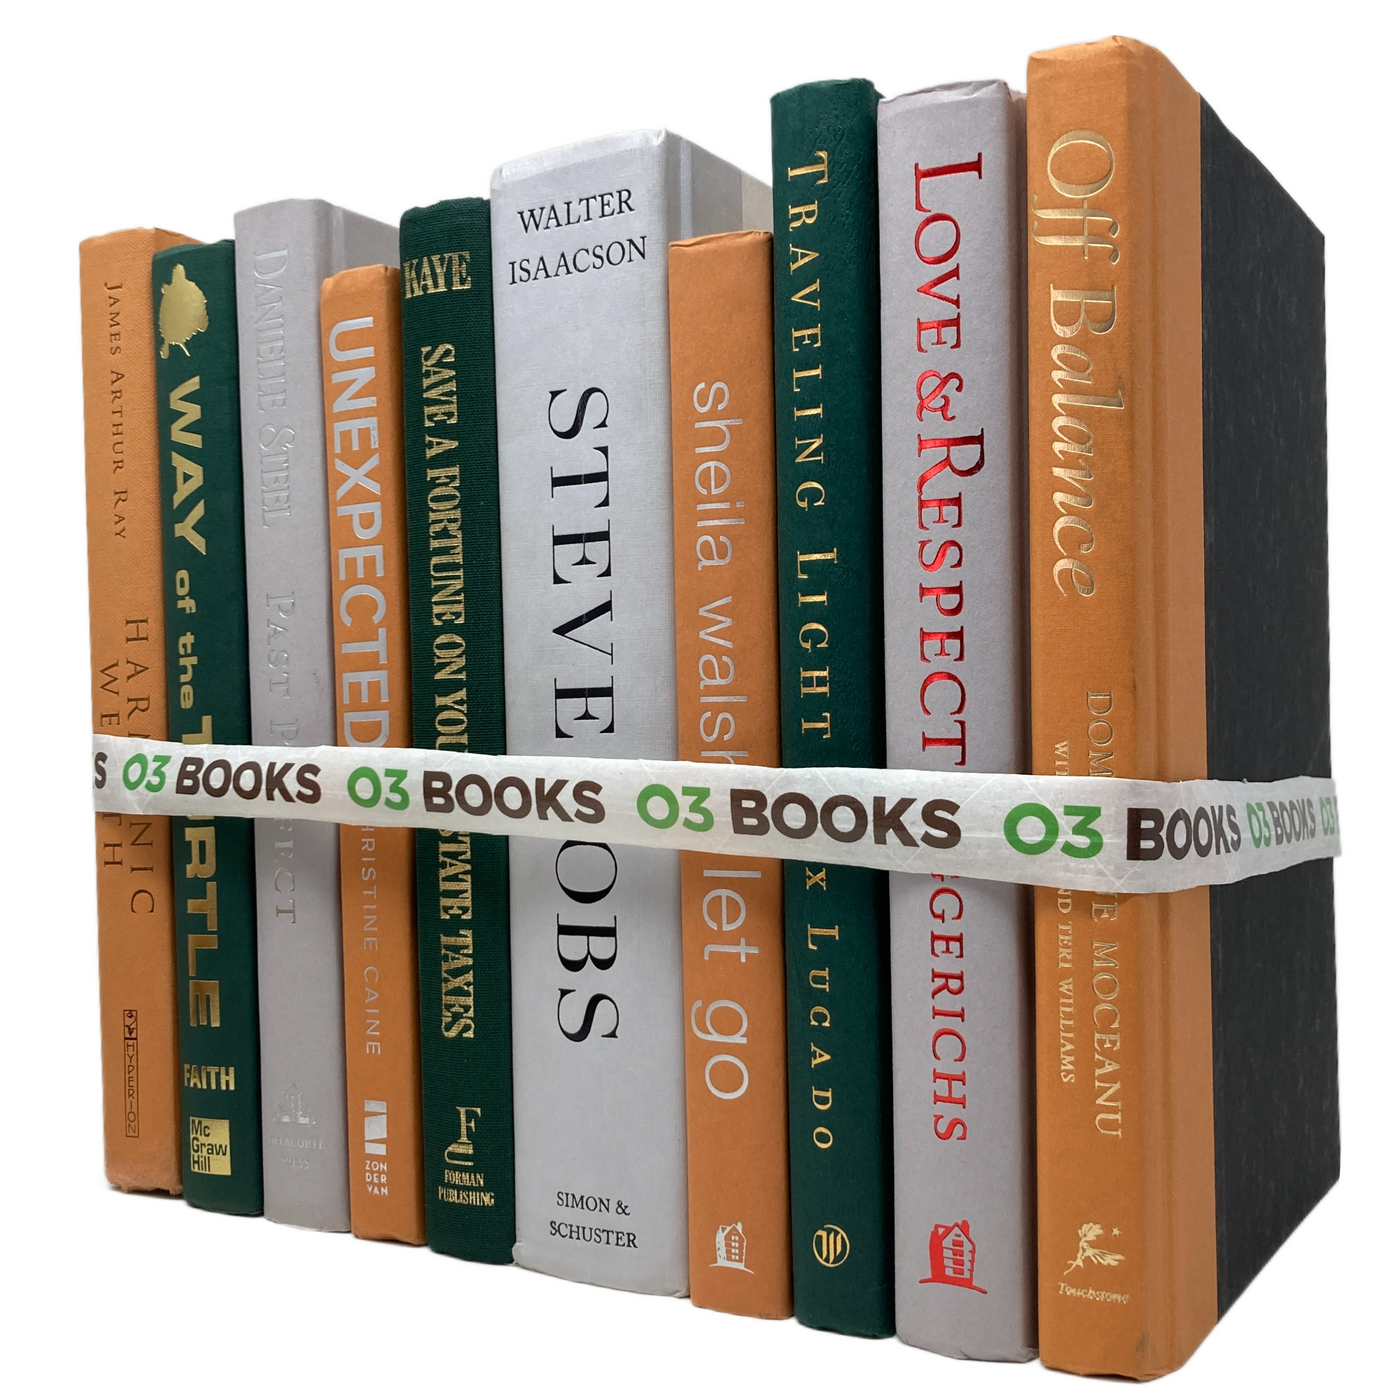 Forest Flame Decorative Books Orange, Green and Lightgray